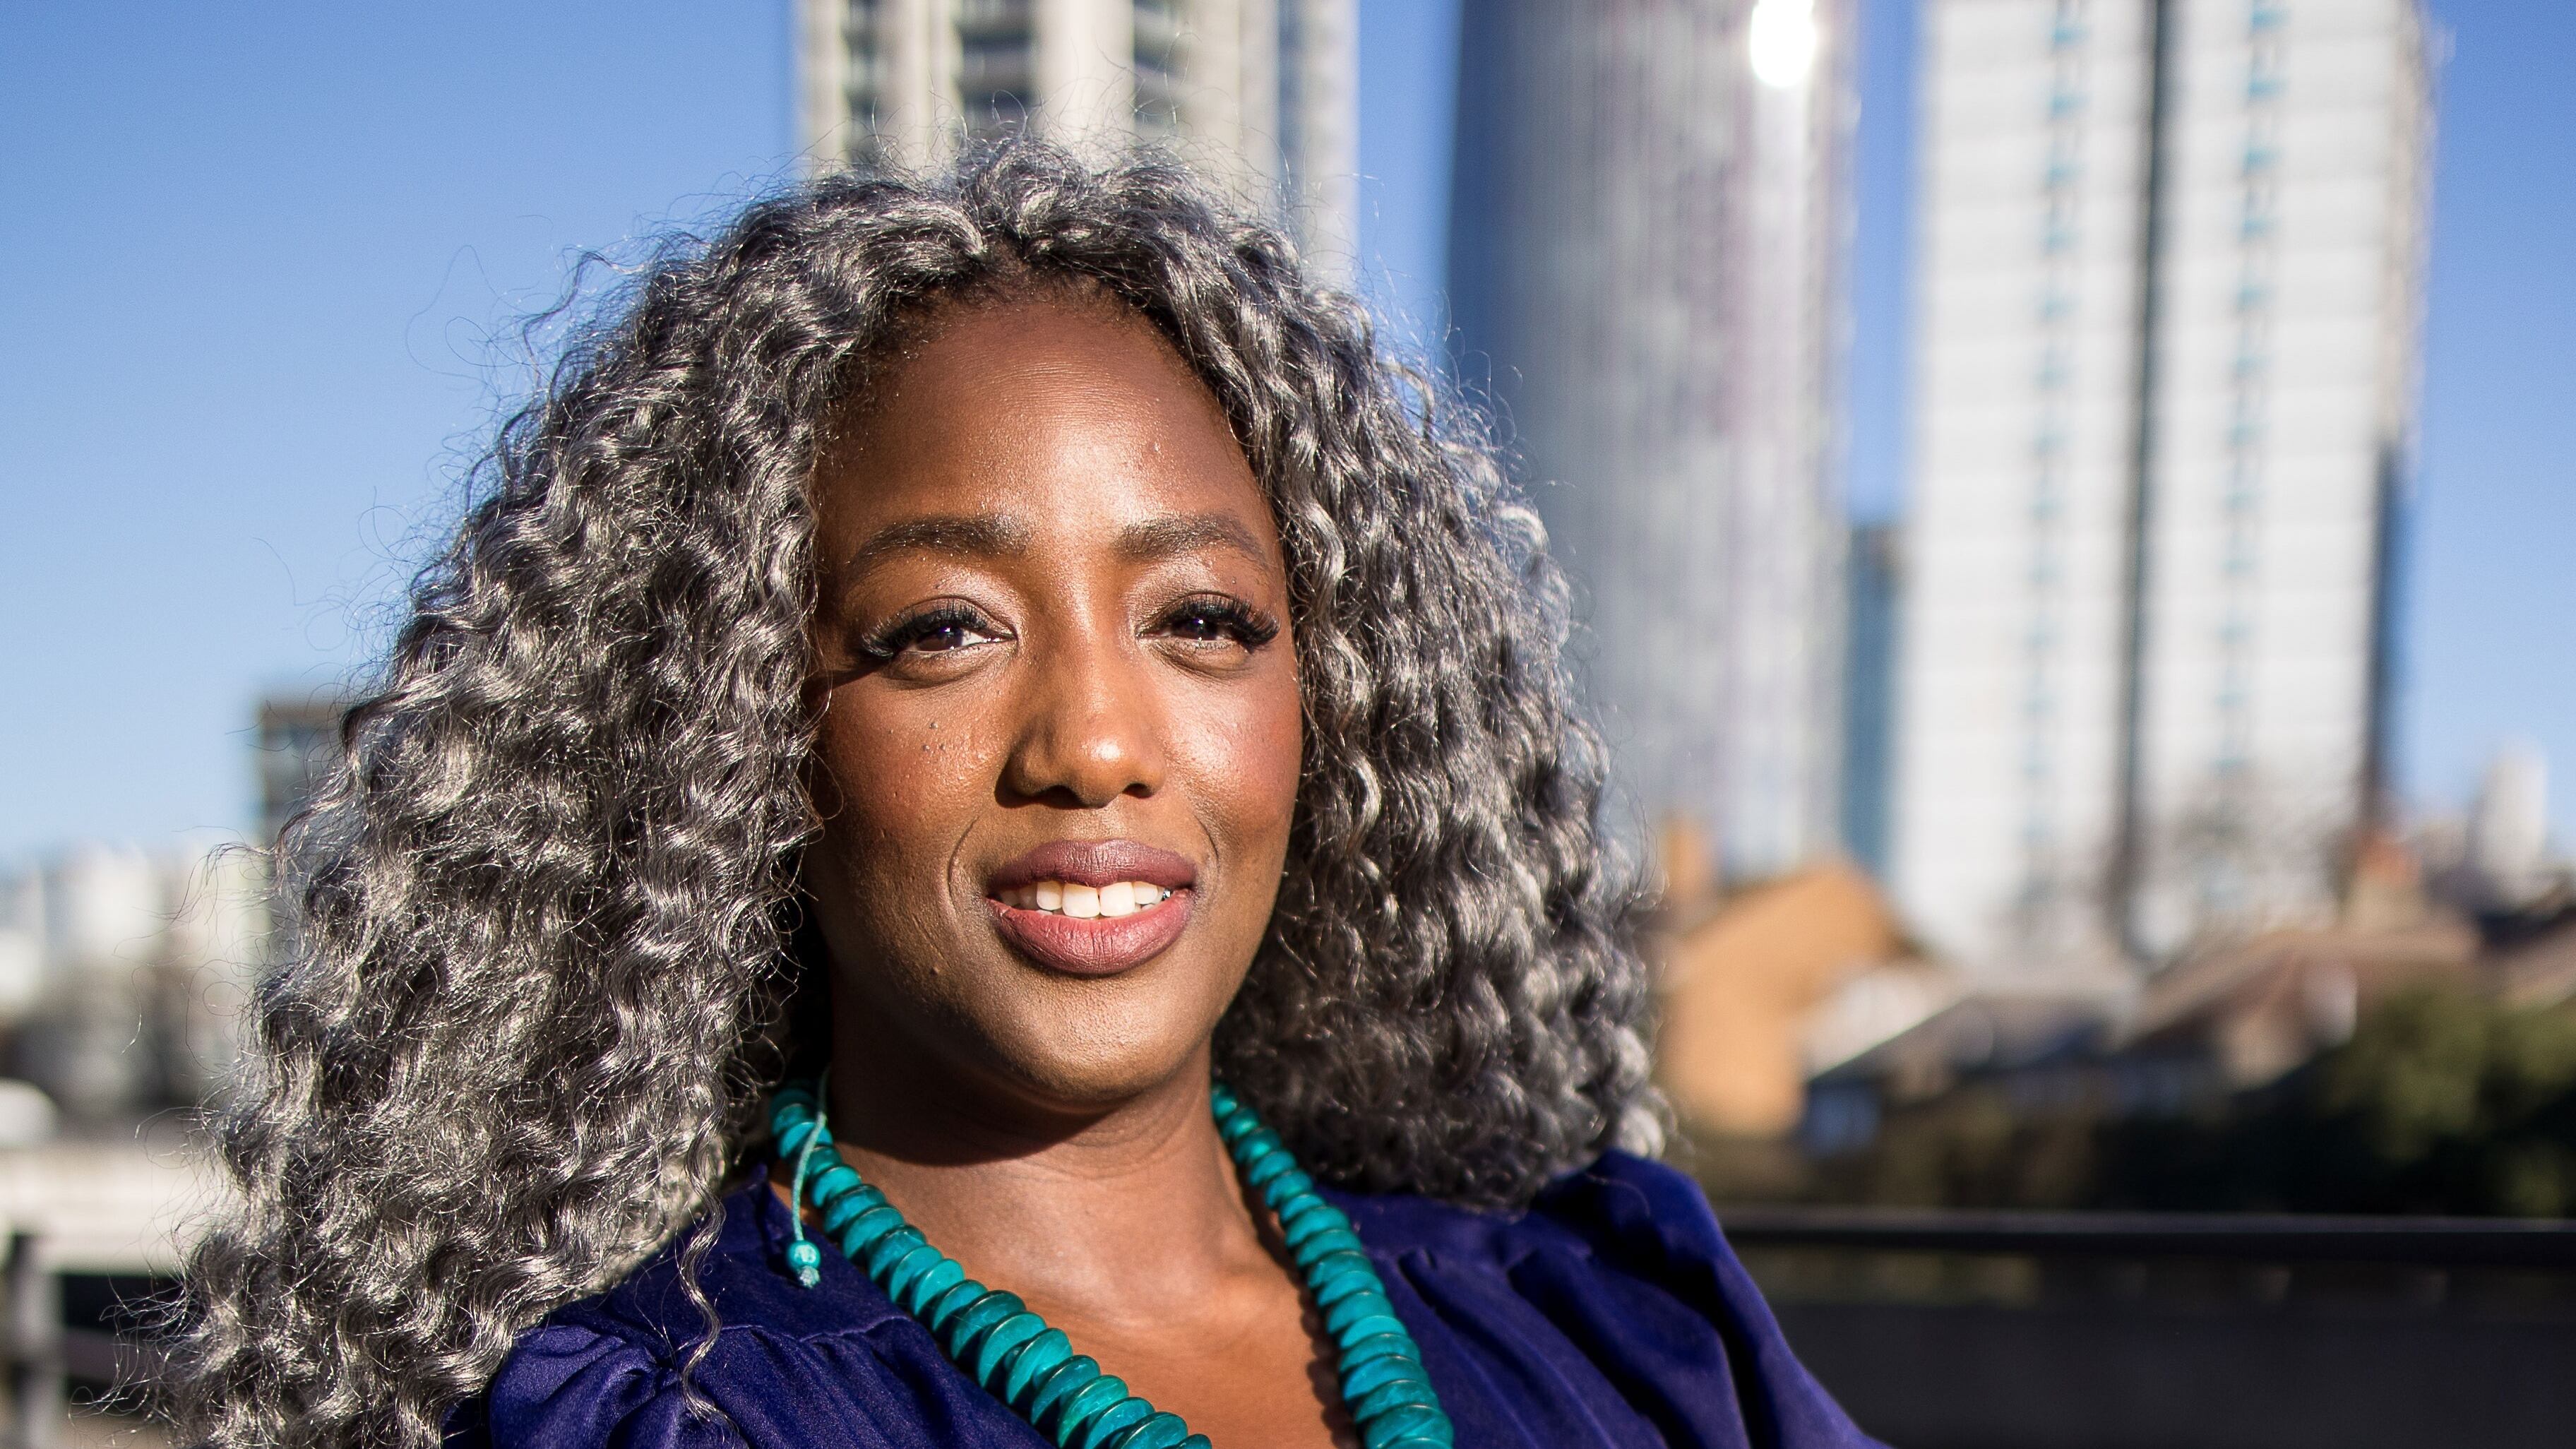 Dr Anne-Marie Imafidon is the new chancellor of Glasgow Caledonian University